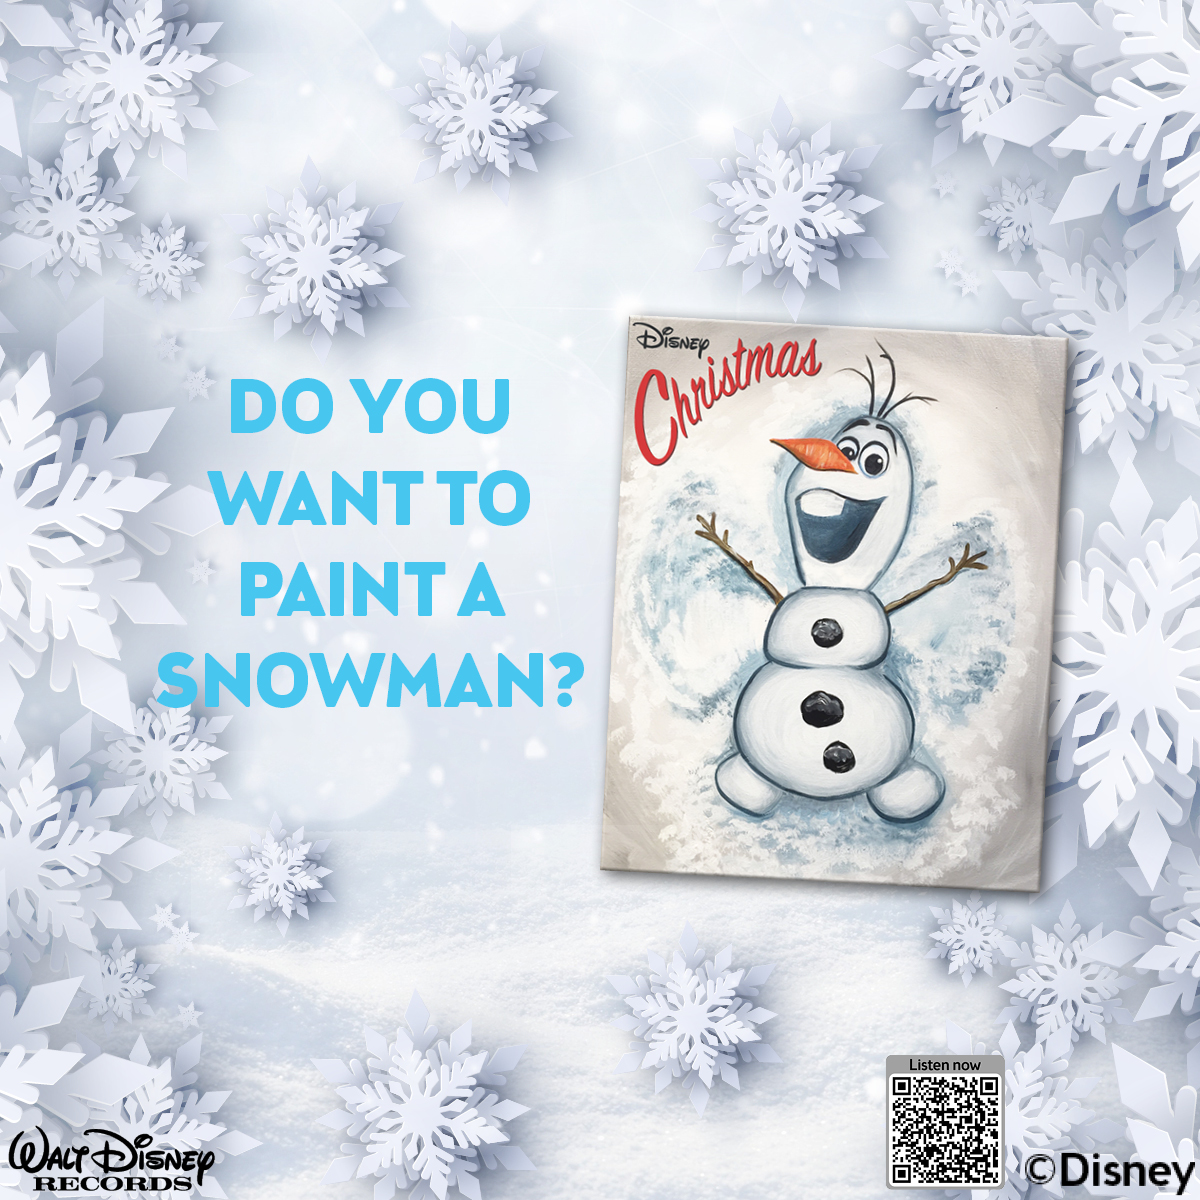 Do You Want to Paint a Snowman?